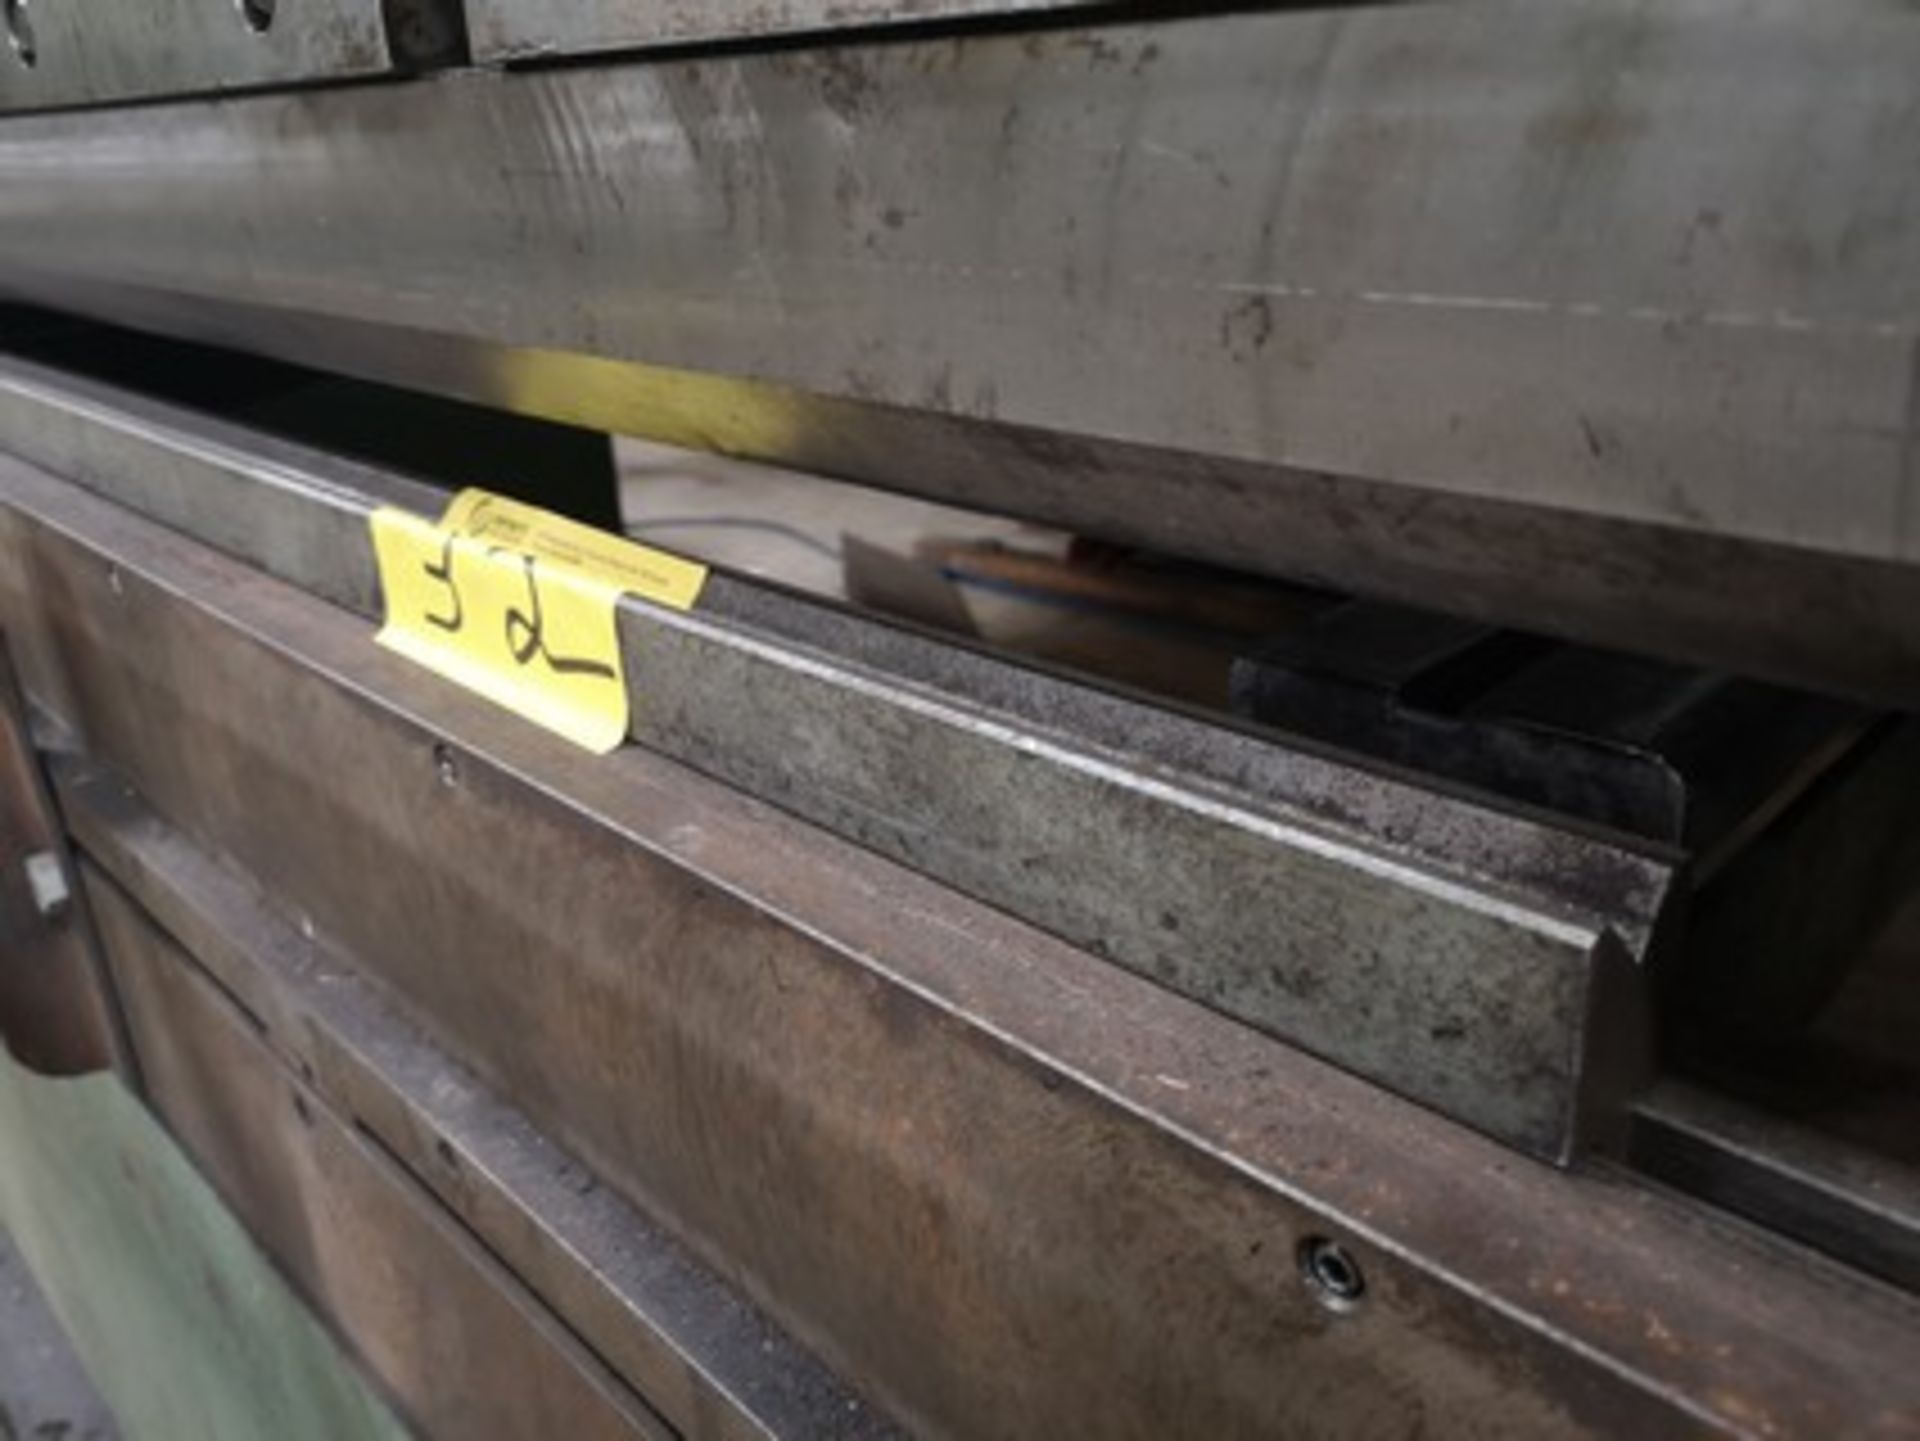 LOT OF (3) PRESS BRAKE DIES (10', 6' AND (1) TOP 11-1/2') (MOUNTED ON MACHINE) - Image 3 of 3